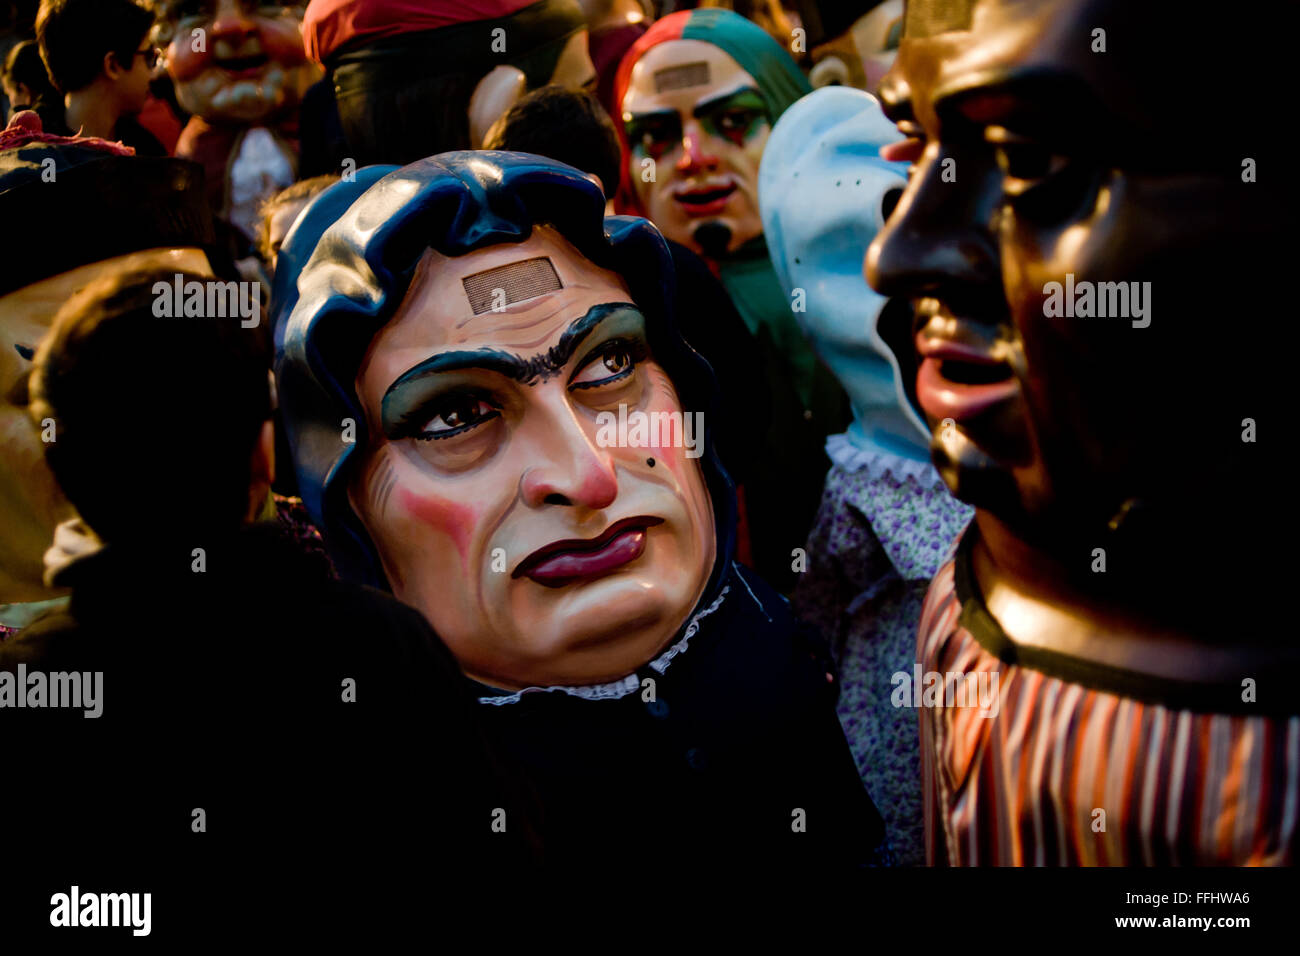 Traditional capgrossos (or cardboard  big heads) are seen in Barcelona, Spain, during the Santa Eulalia winter Festival. Stock Photo